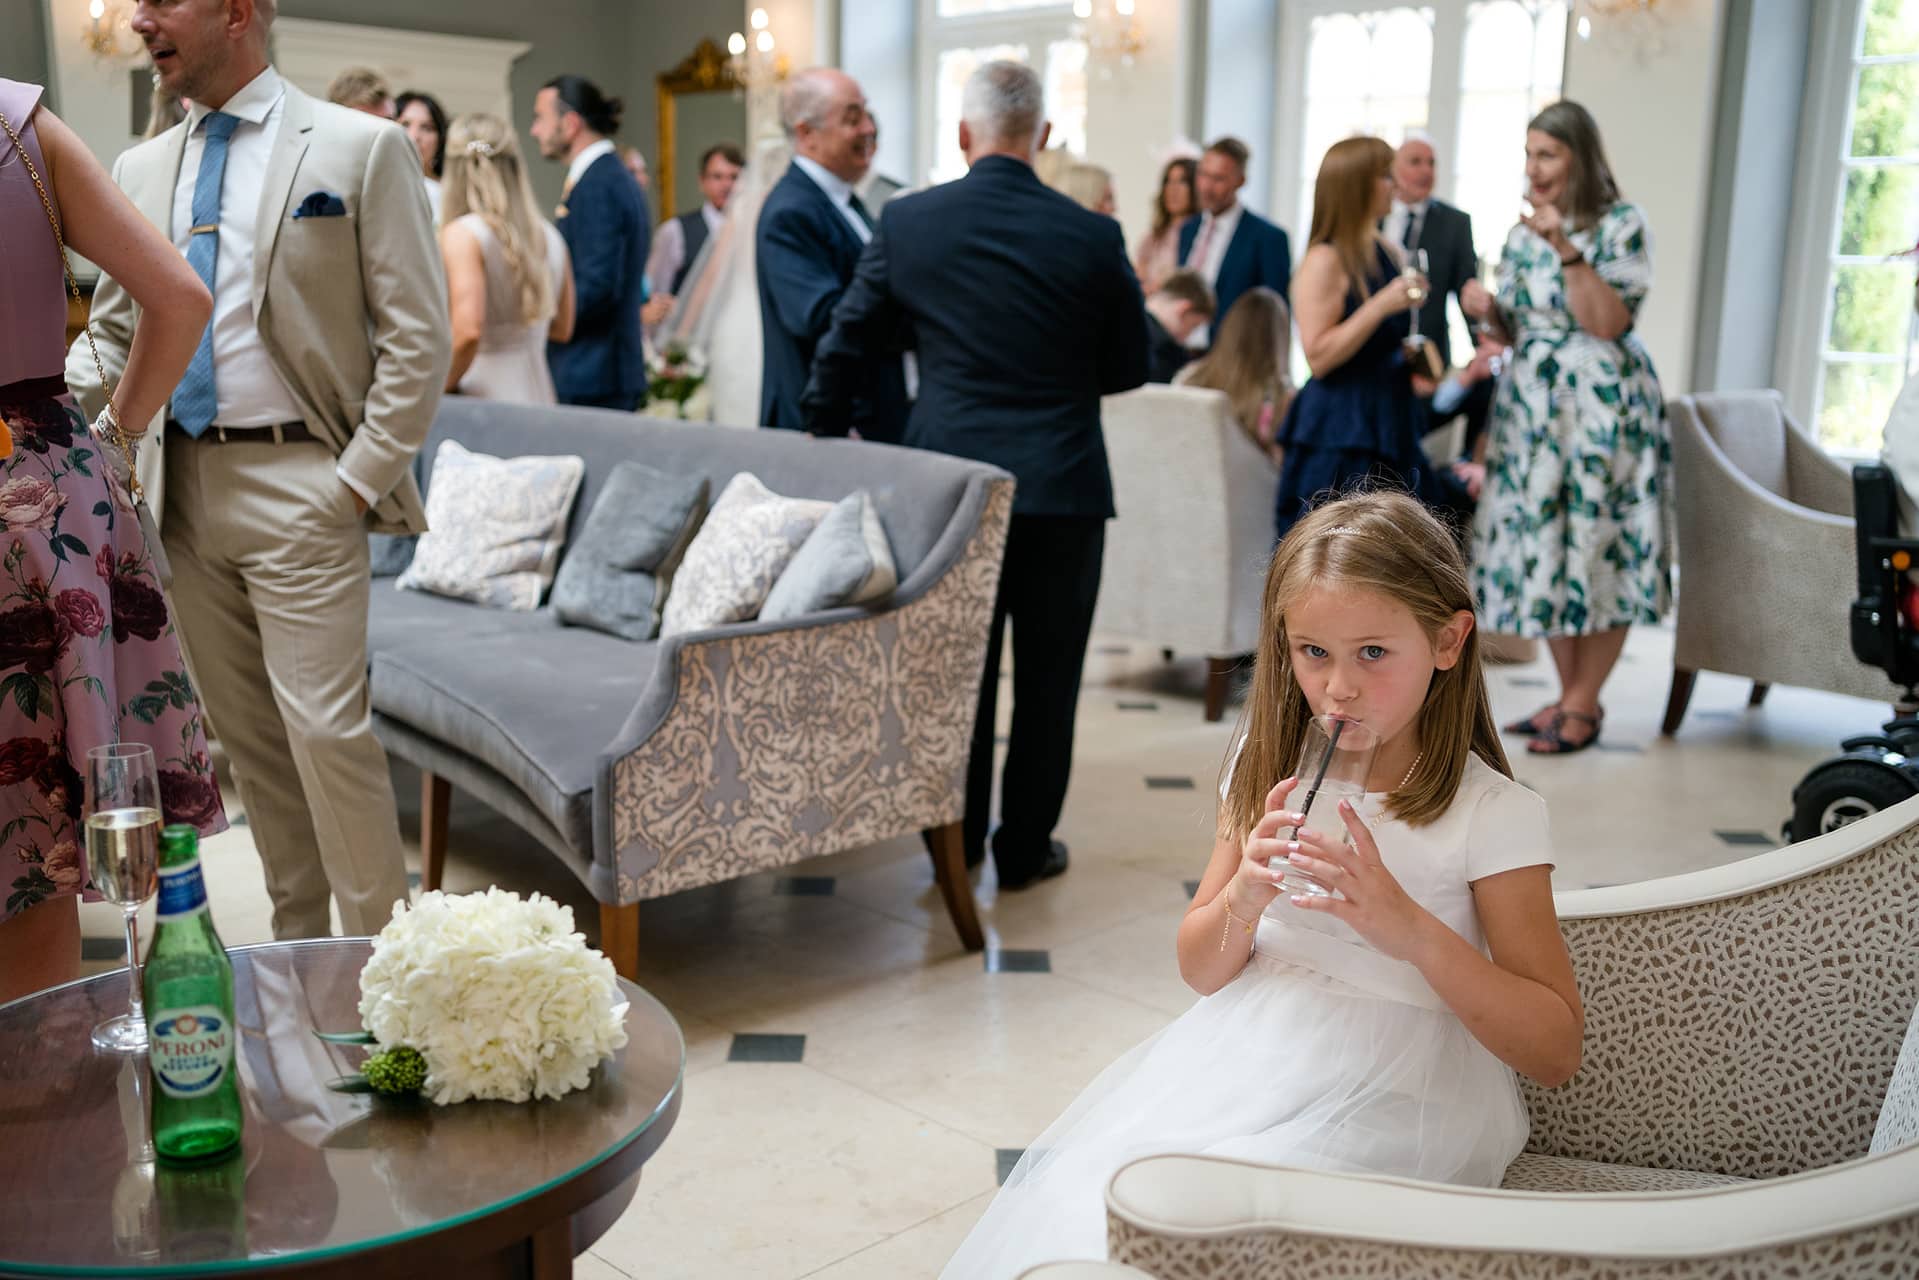 Flower girl drinking through a straw amidst a busy drinks reception behind her